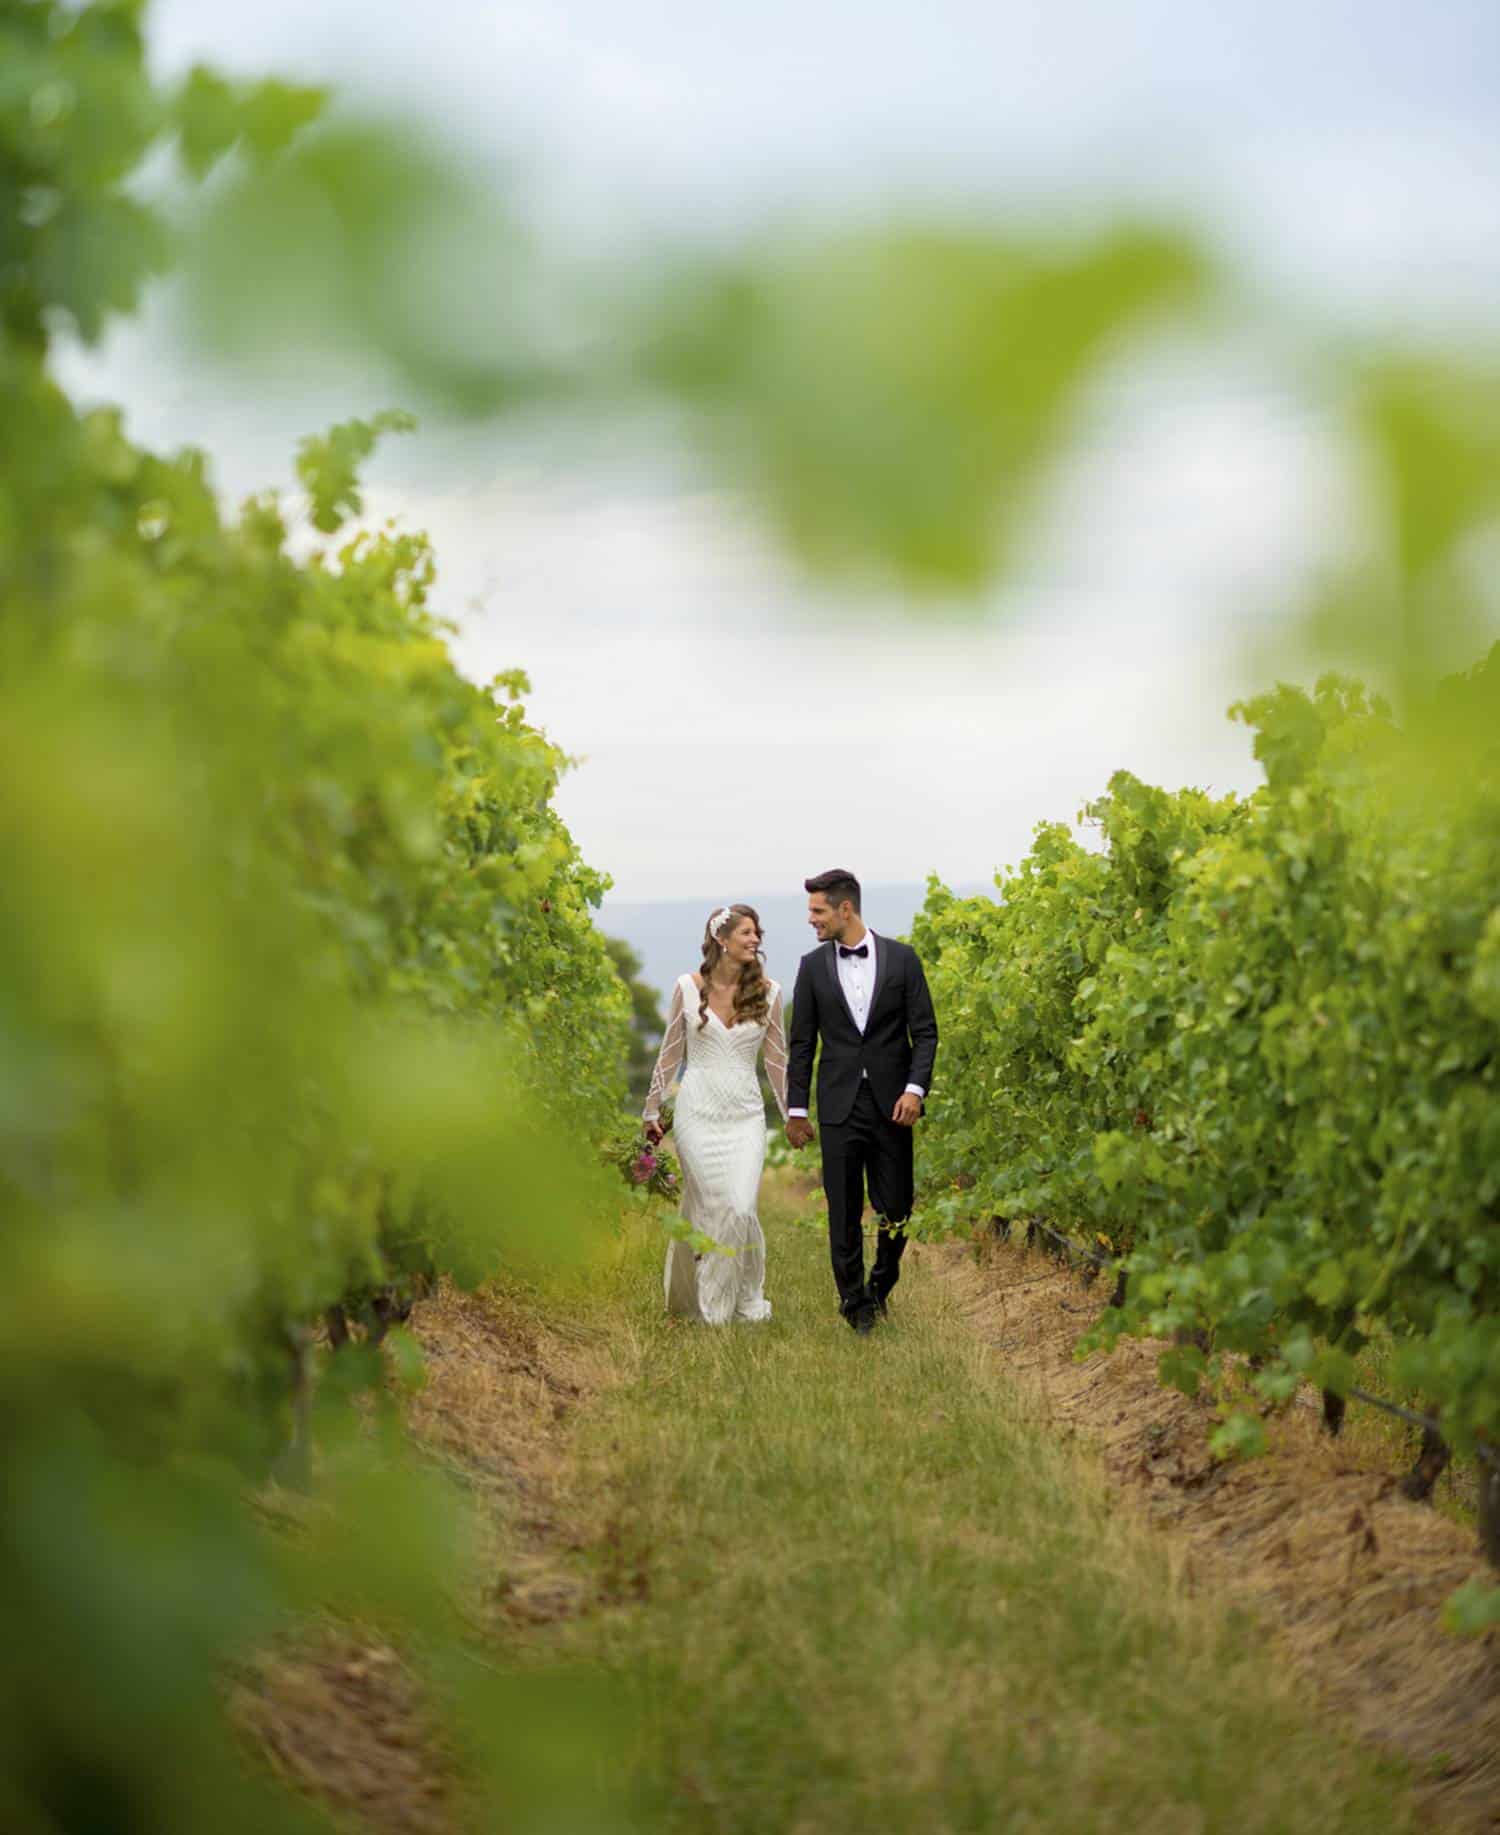 2019 Guide On How To Write Your Wedding Vows Vines Of The Yarra